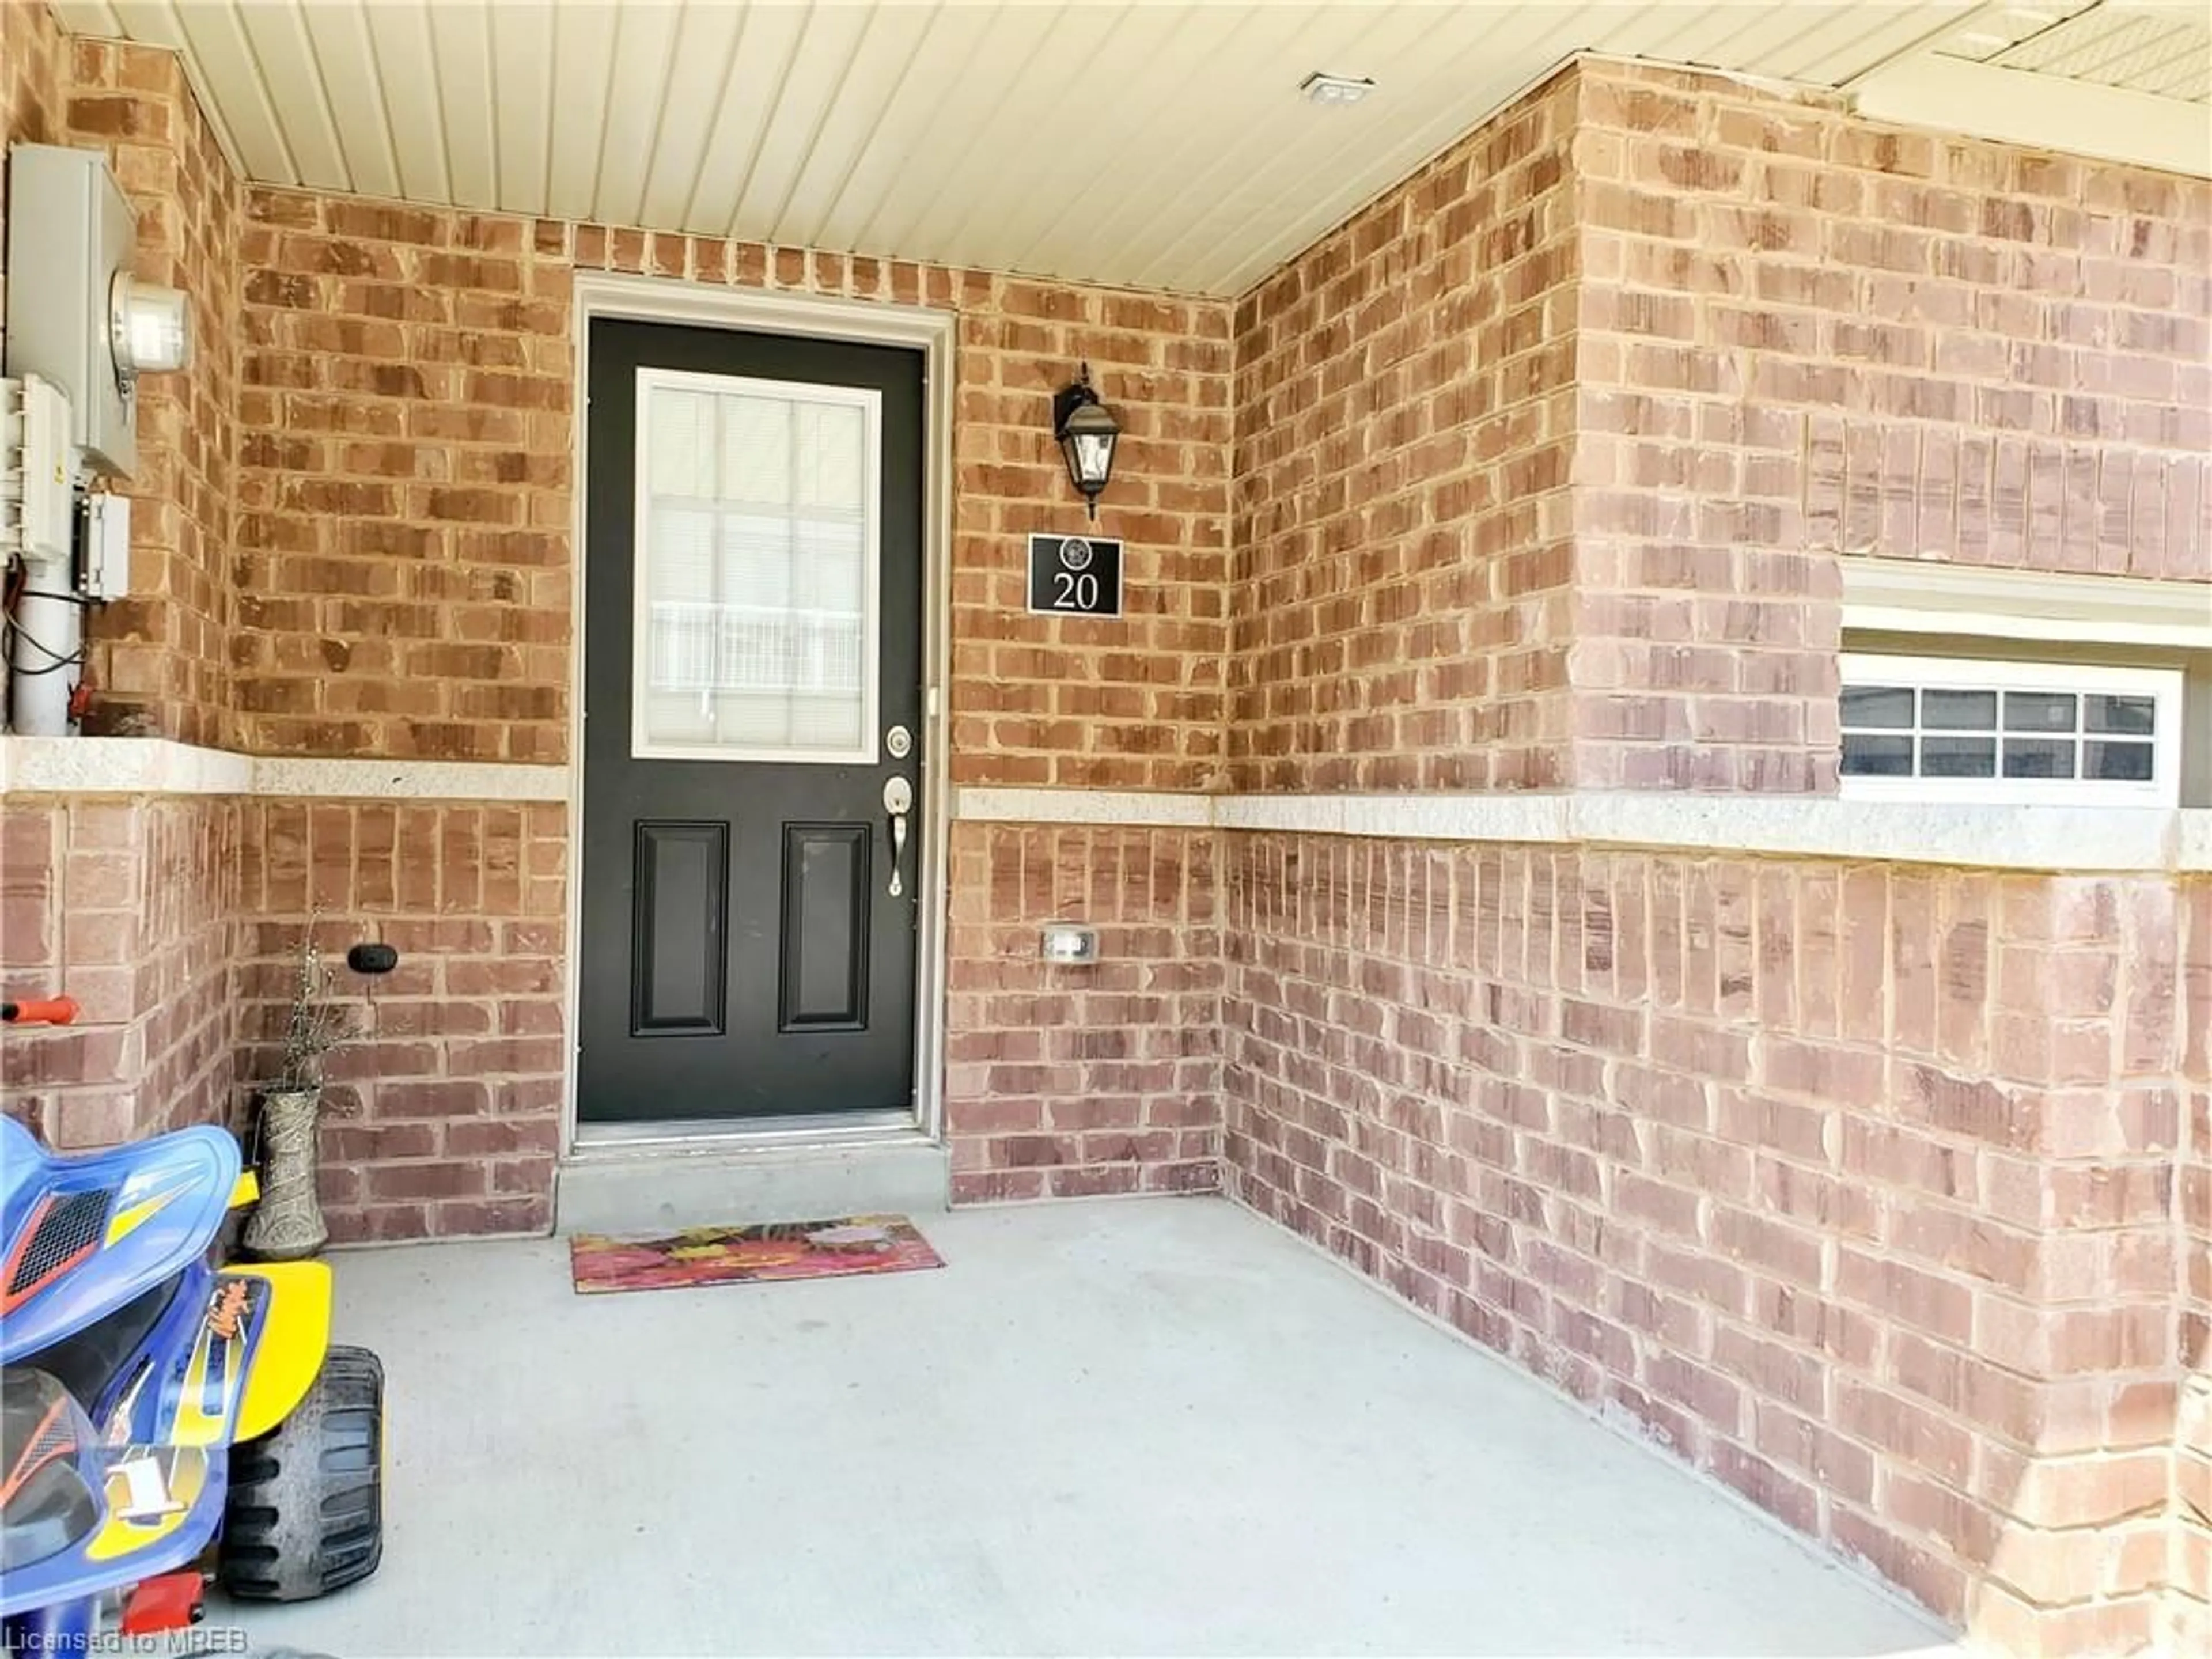 Home with brick exterior material for 570 Linden Dr #20, Cambridge Ontario N3H 0C9